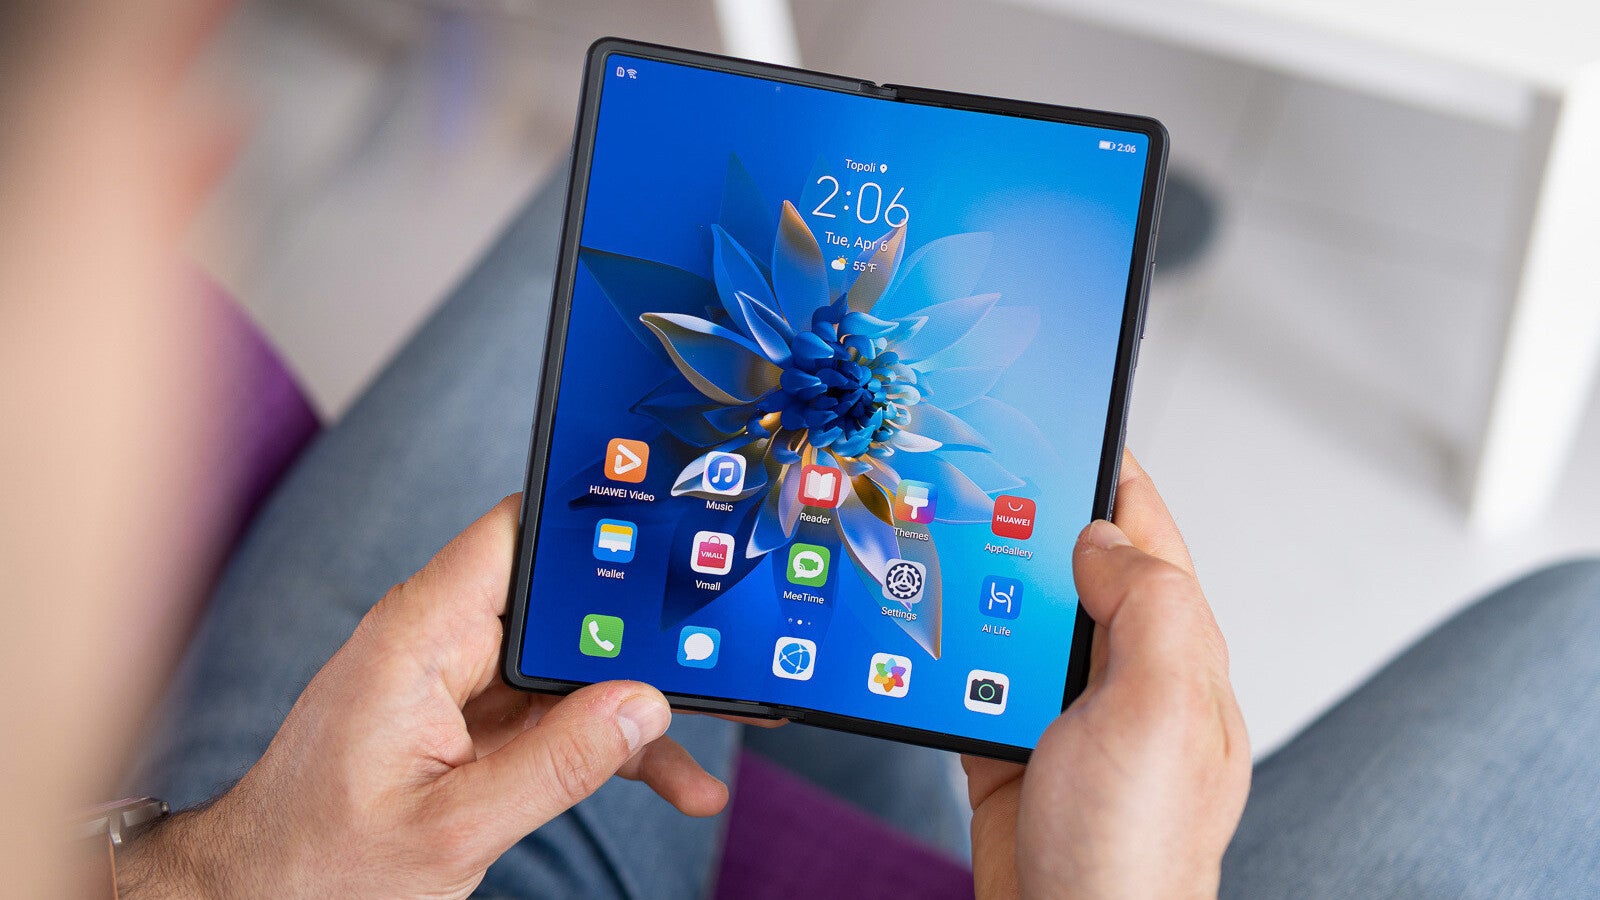 Honor hints at foldable phone plans with Magic Fold, Flip and Flex